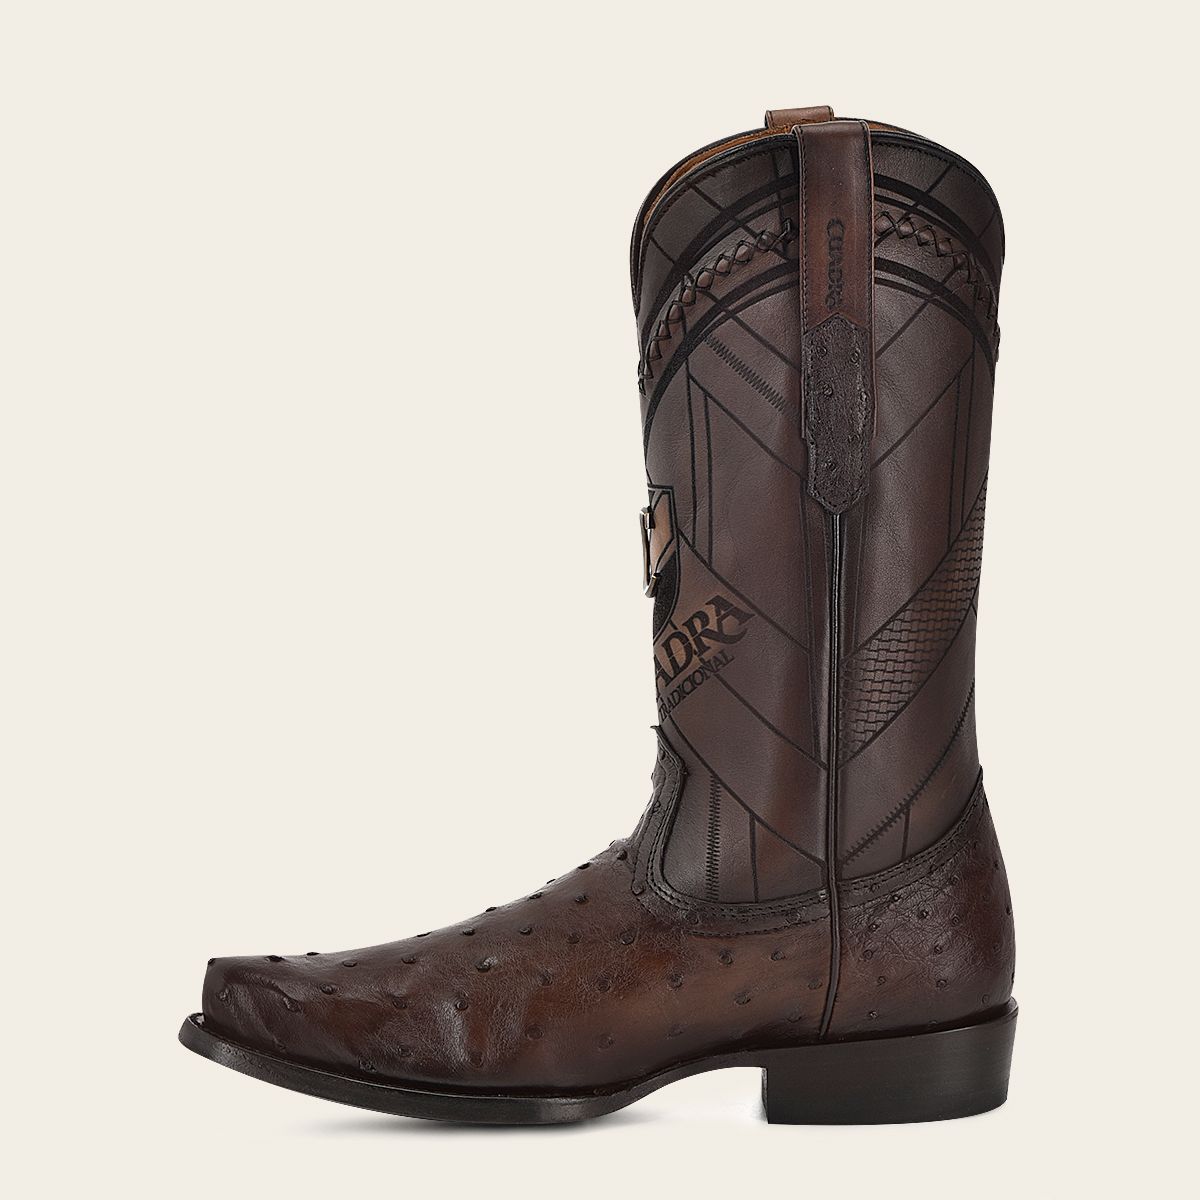 S42FA1 - Cuadra brown dress cowboy ostrich leather boots for men